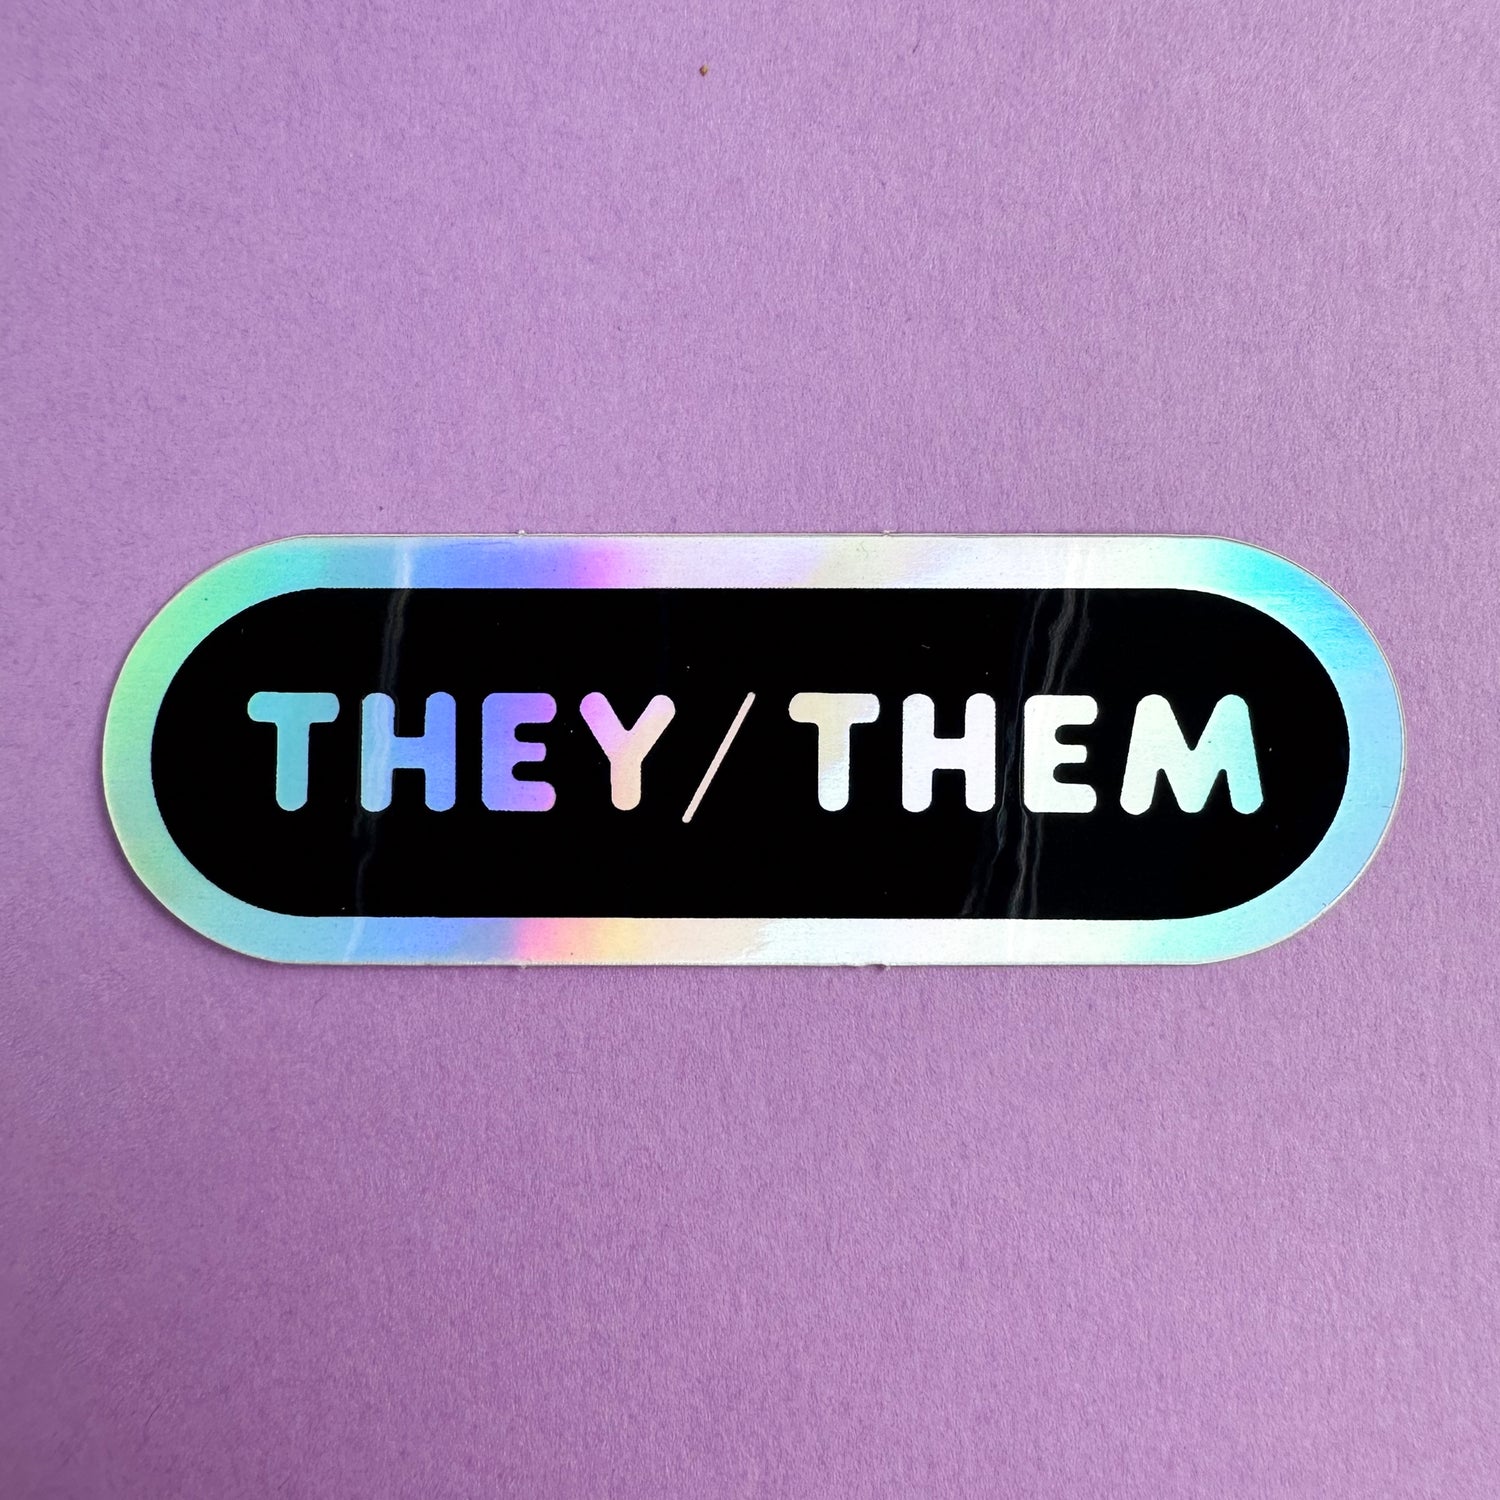 An oval shaped sticker with the words "They/Them" in holographic bubble letters on a black background. The sticker is on a purple piece of paper. 